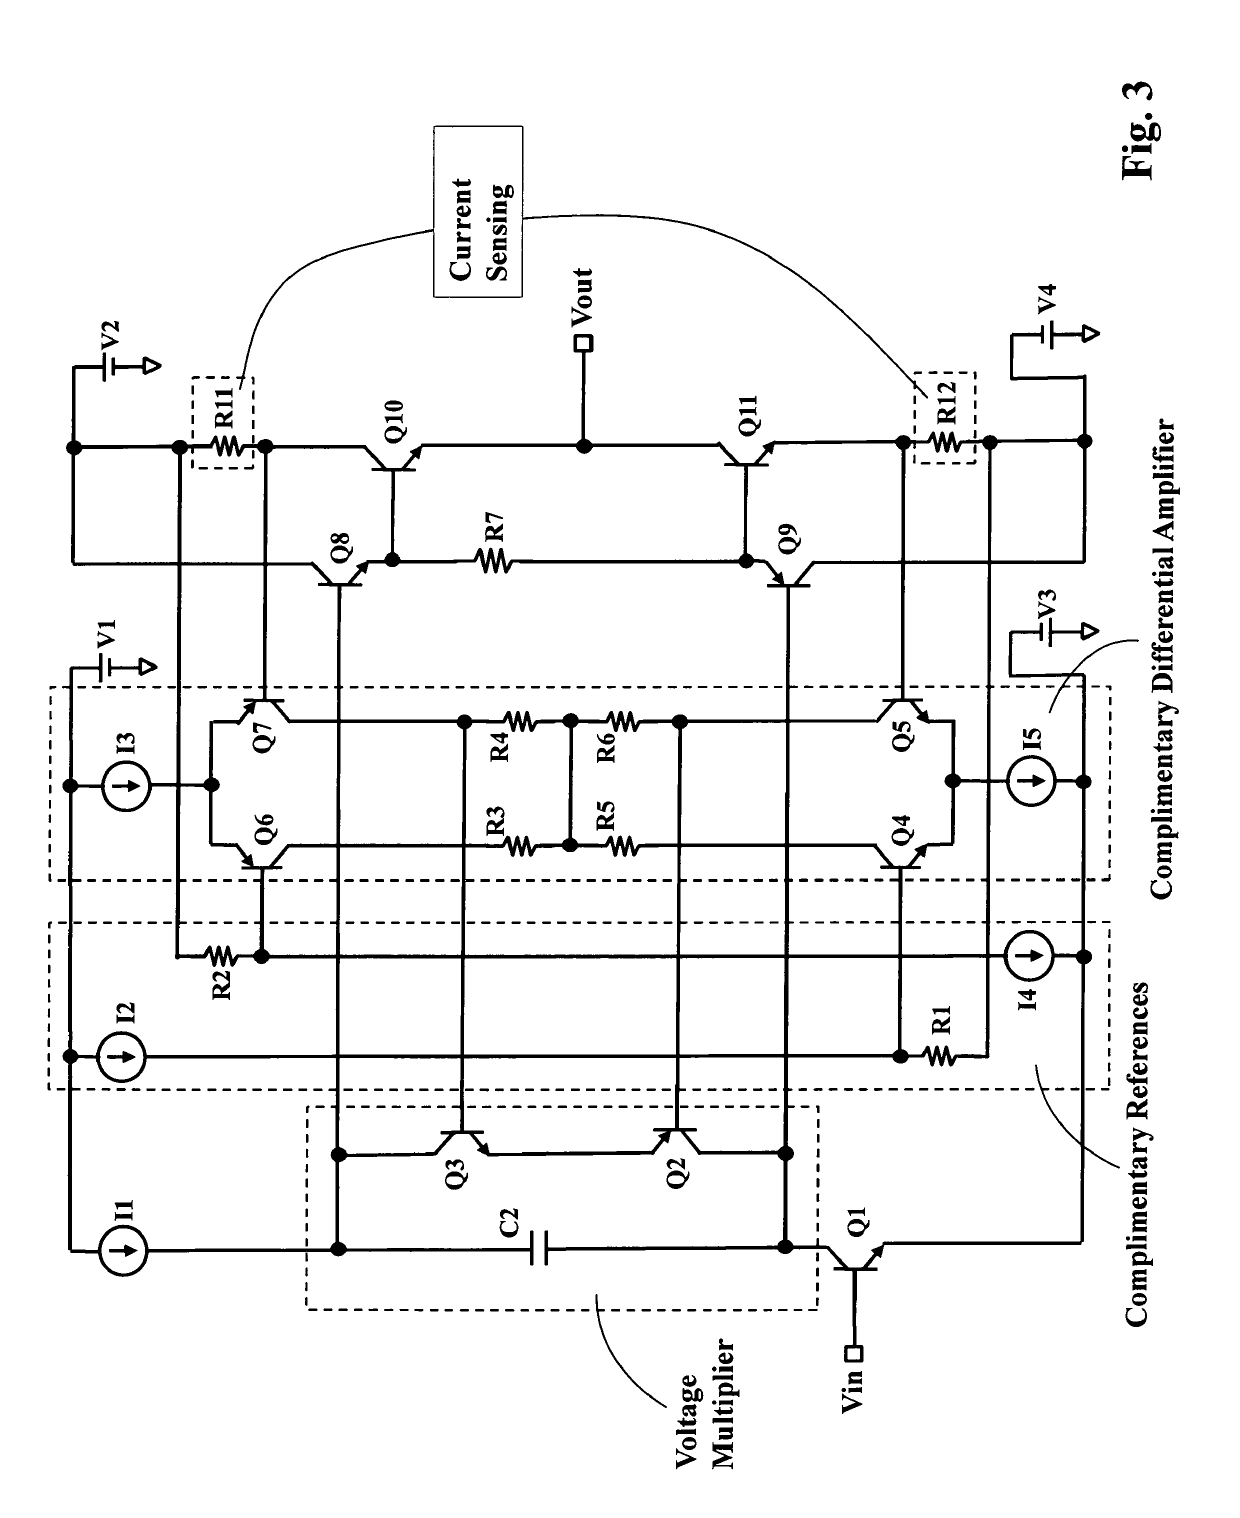 Biasing method without using thermal compensation applicable for both class-A and class-AB audio power amplifier